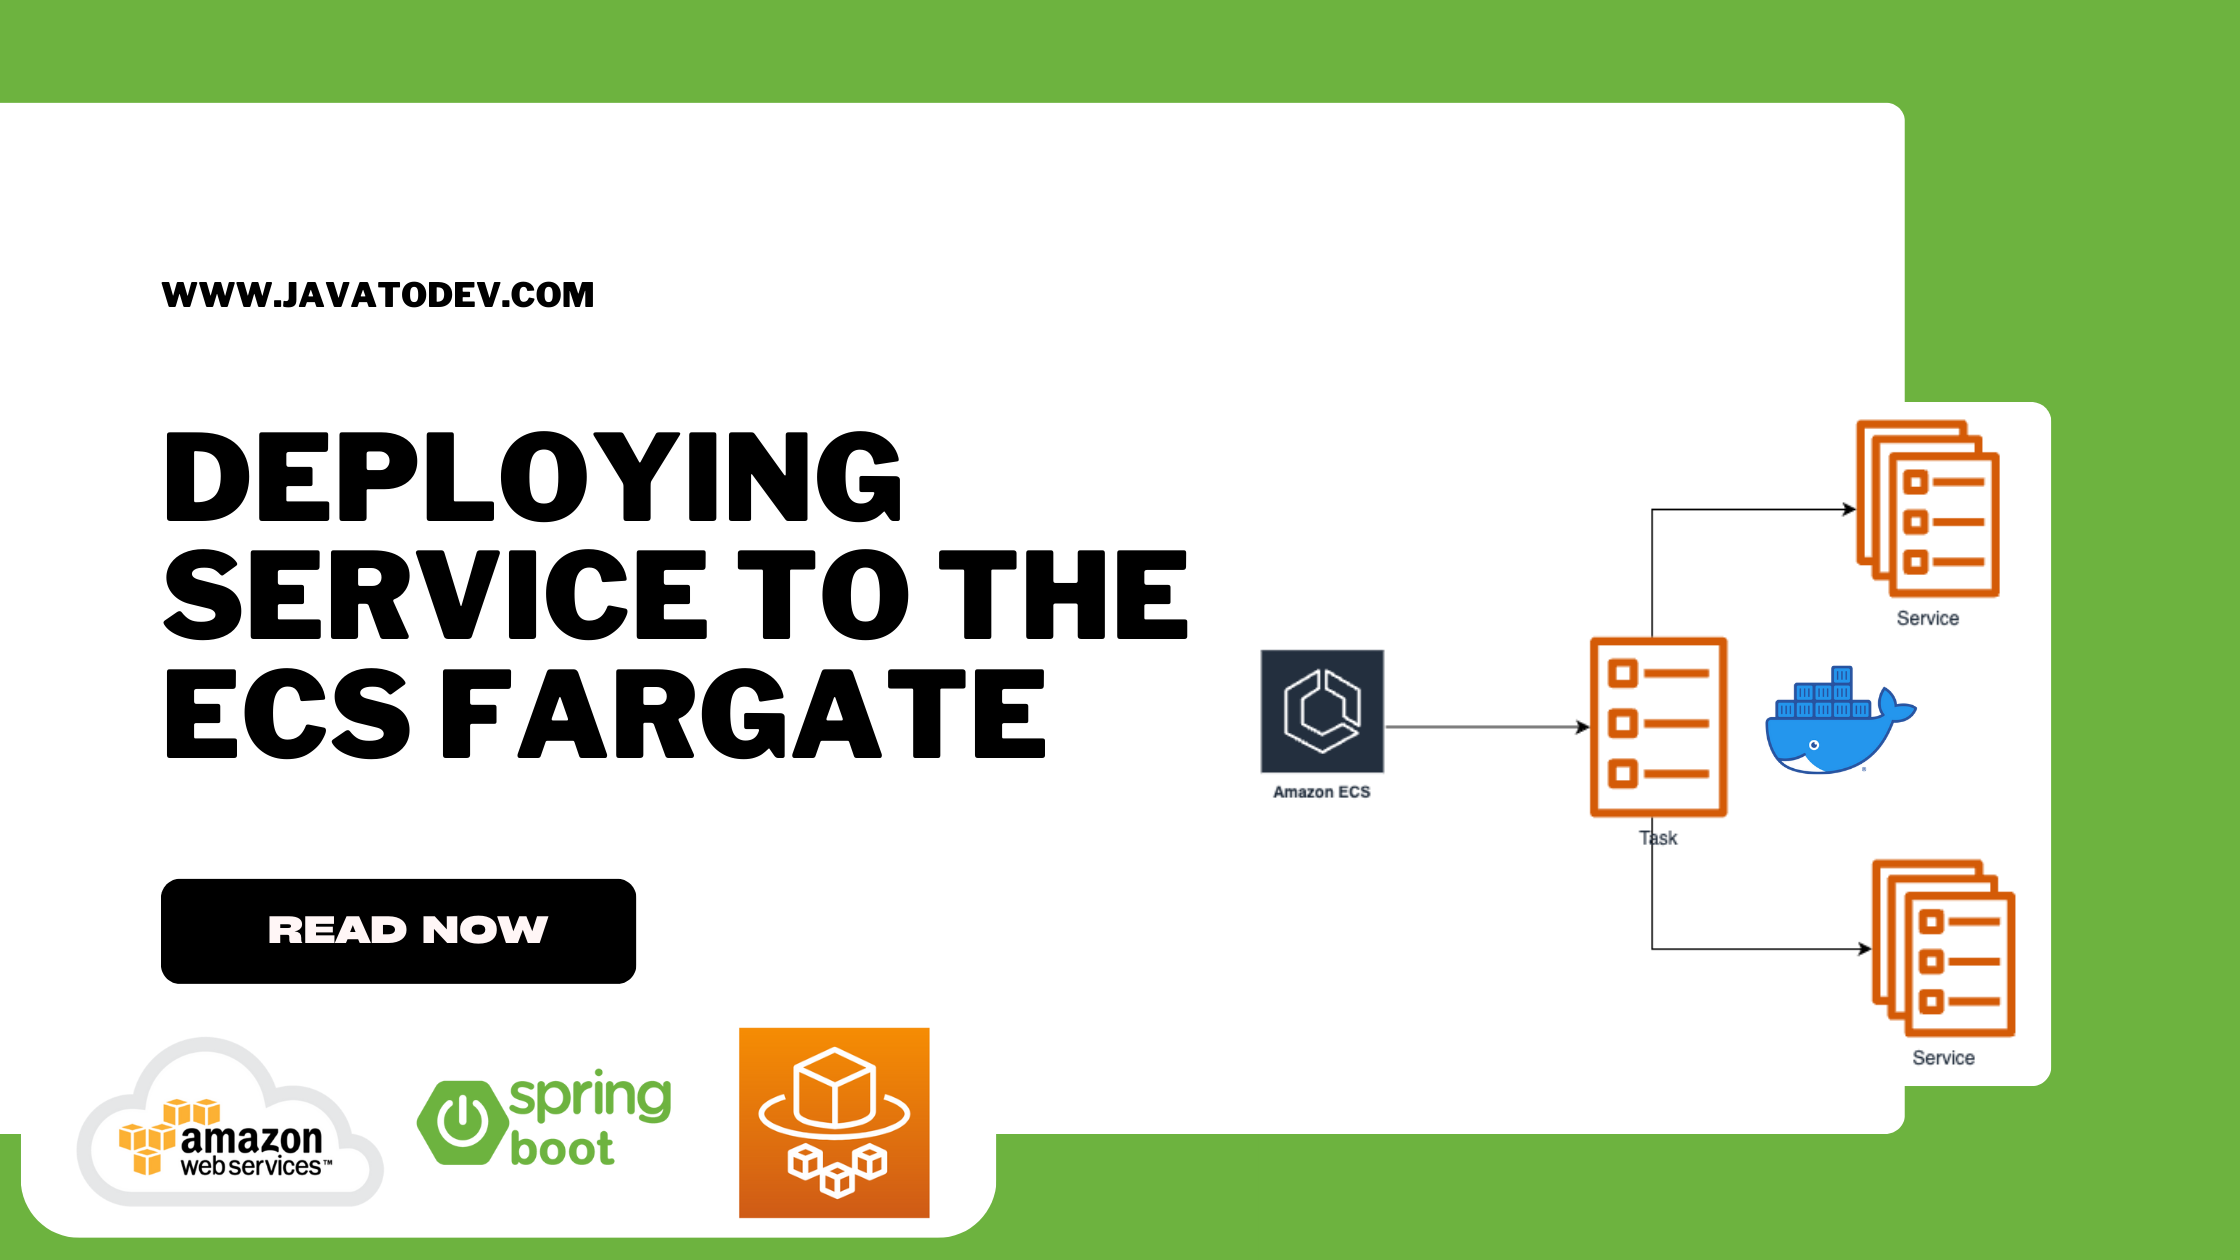 How to Deploy Service To The ECS Fargate